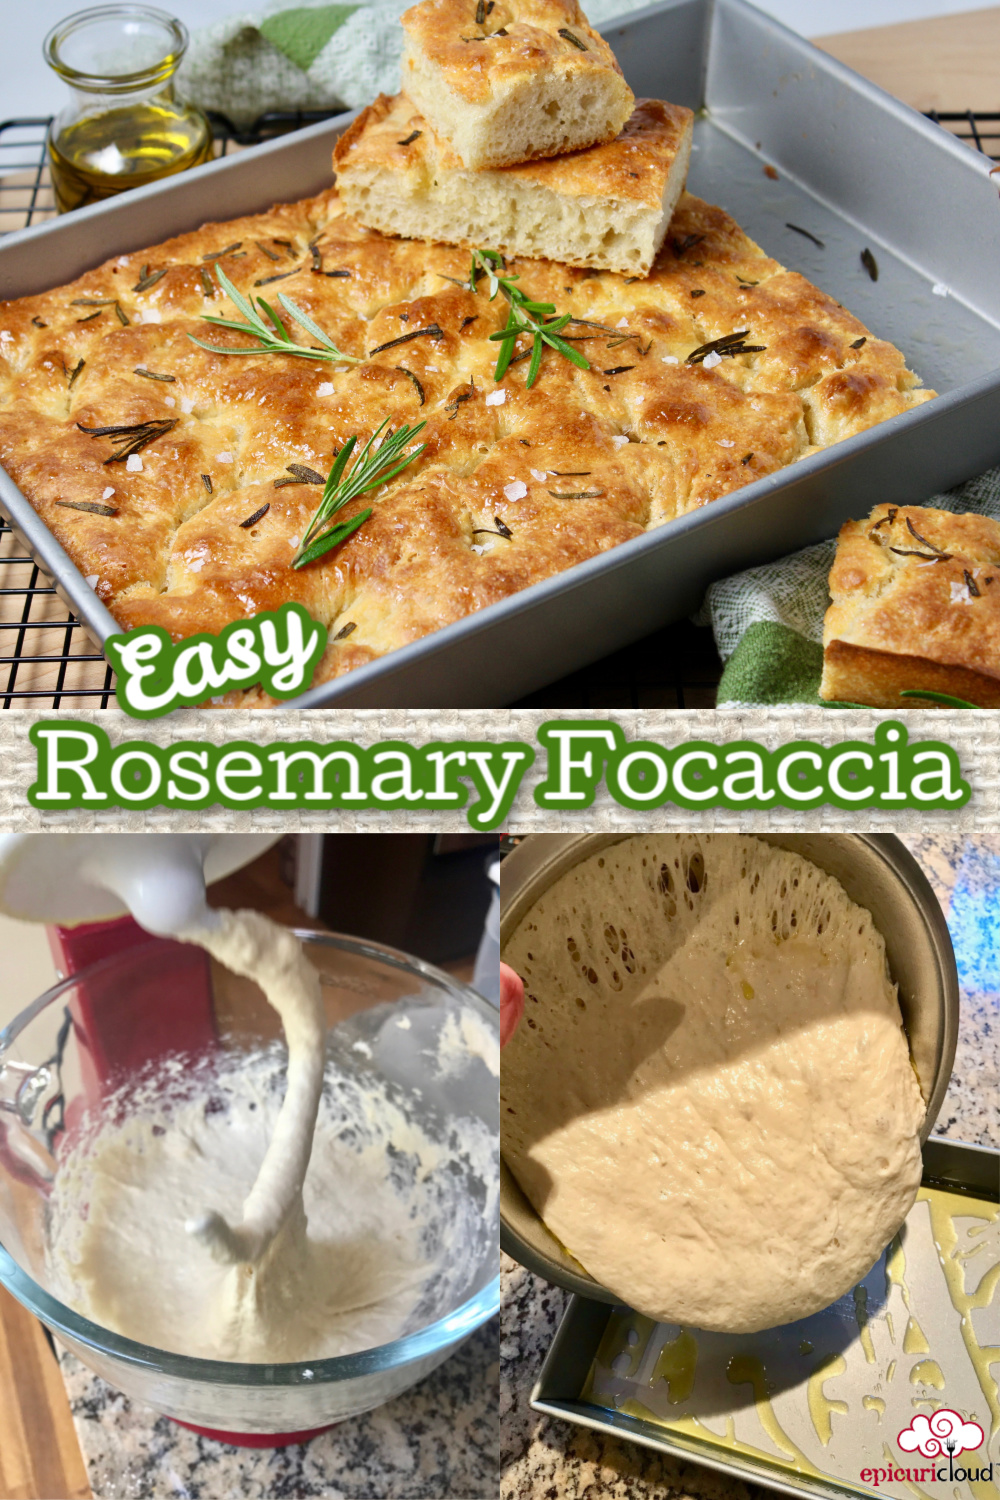 https://www.epicuricloud.com/wp-content/uploads/2020/06/Rosemary-Focaccia-Pin.jpg